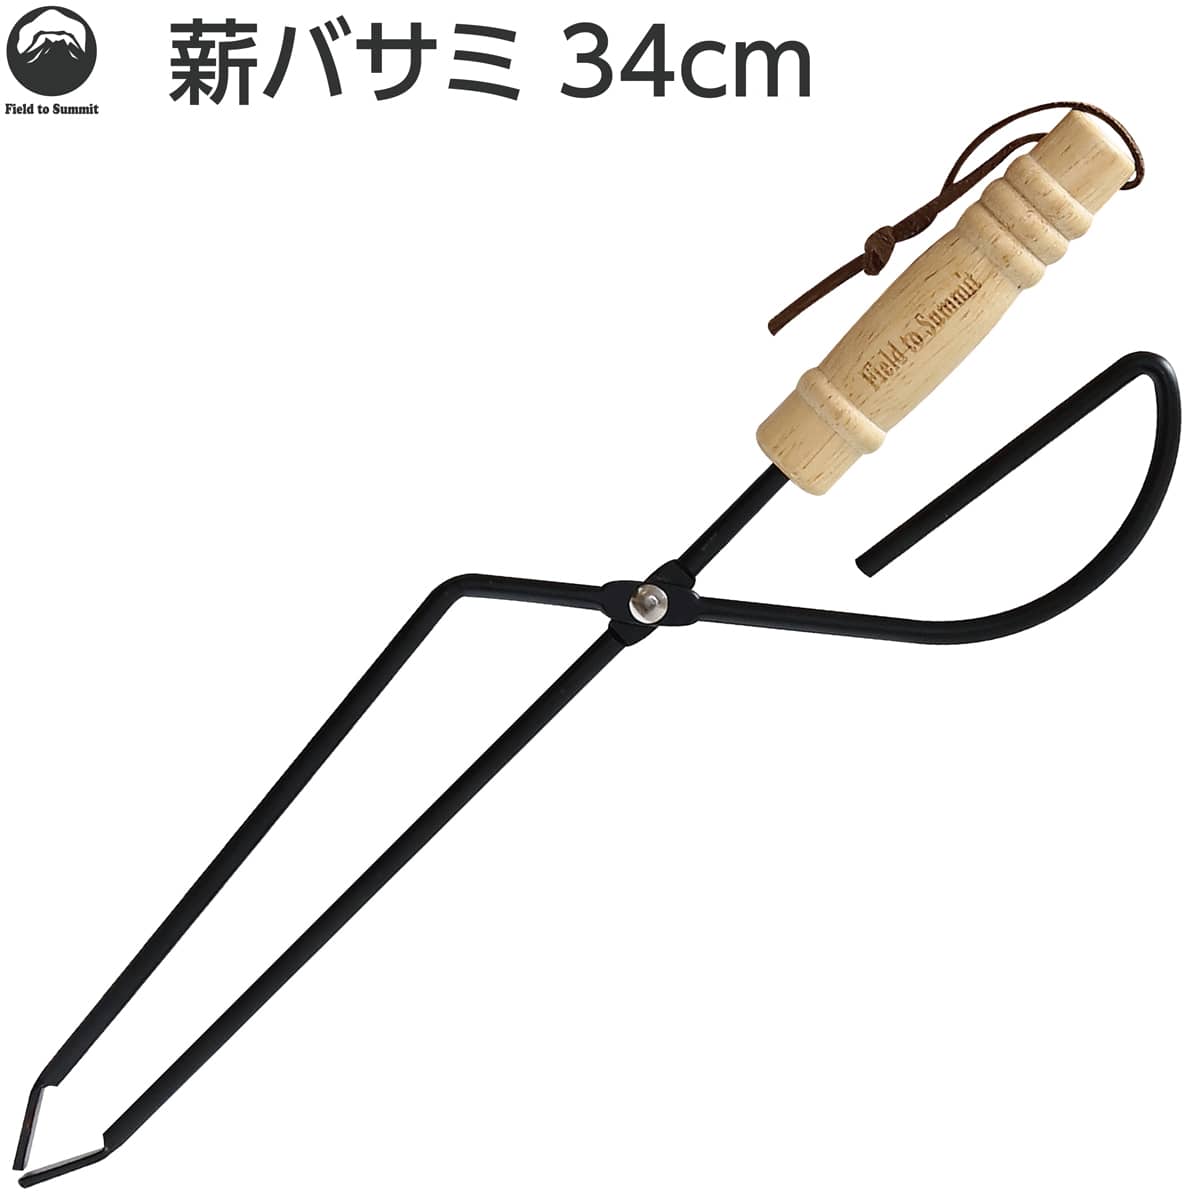 Field to Summit 薪ばさみ 34cm OFHTONG34 炭